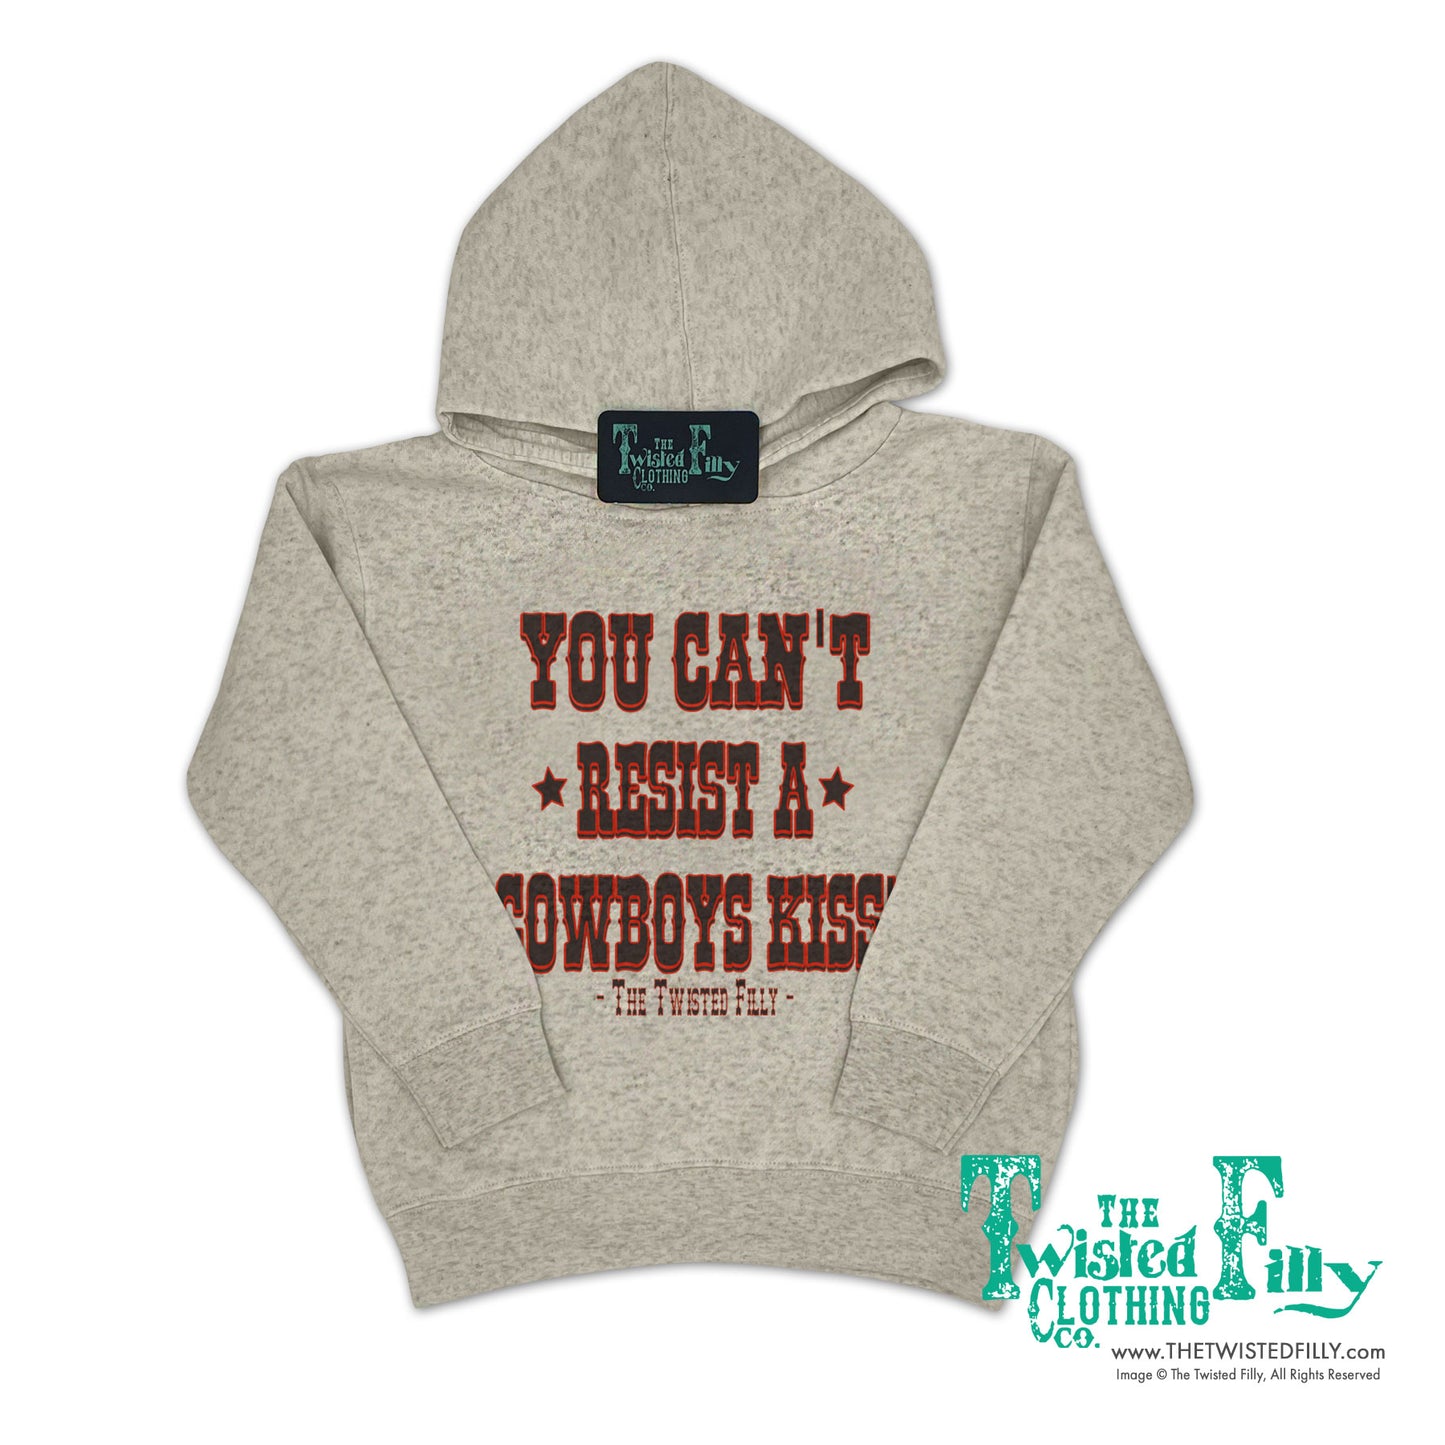 Can't Resist A Cowboys Kiss - Toddler Hoodie - Oatmeal